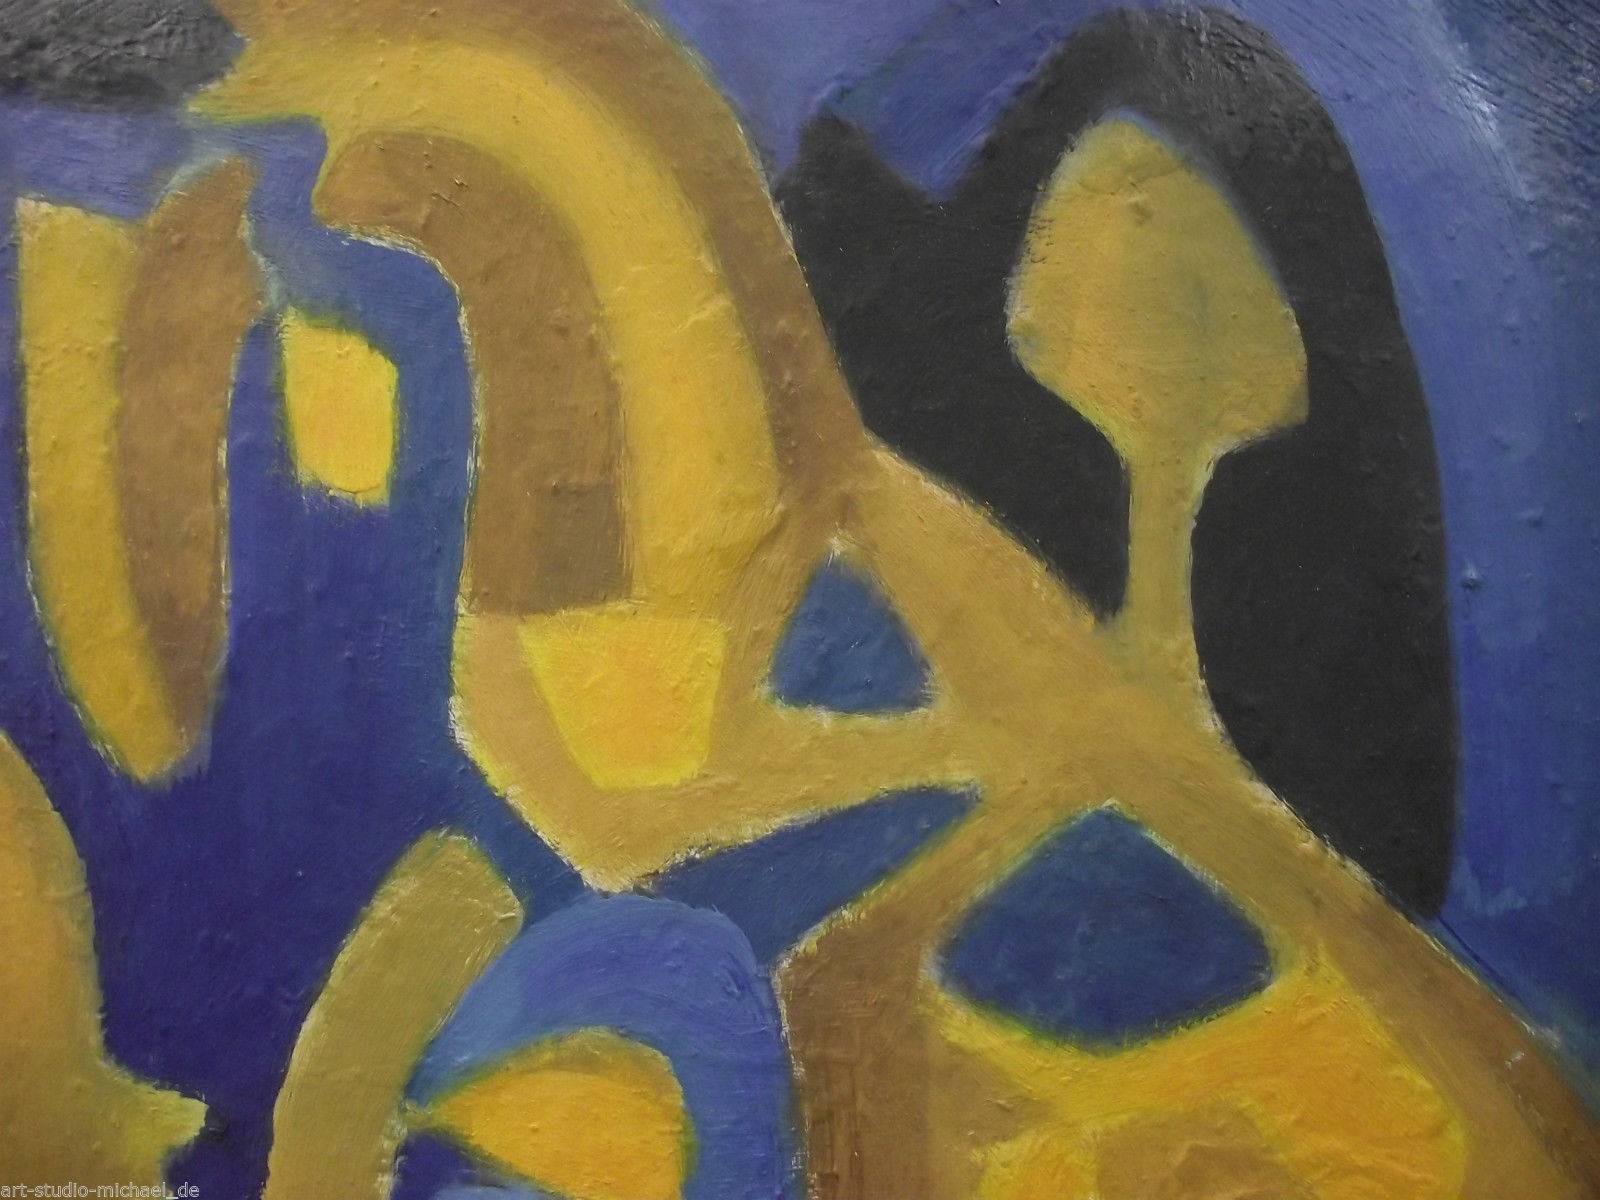 Abstract composition with vivid colors in the tones blue, yellow, and black. Monogrammed upper left and dated 61. 
Hugo Barthel was a pupil of Willy Baumeister. In the present composition can be felt very strongly the confrontation with the master.